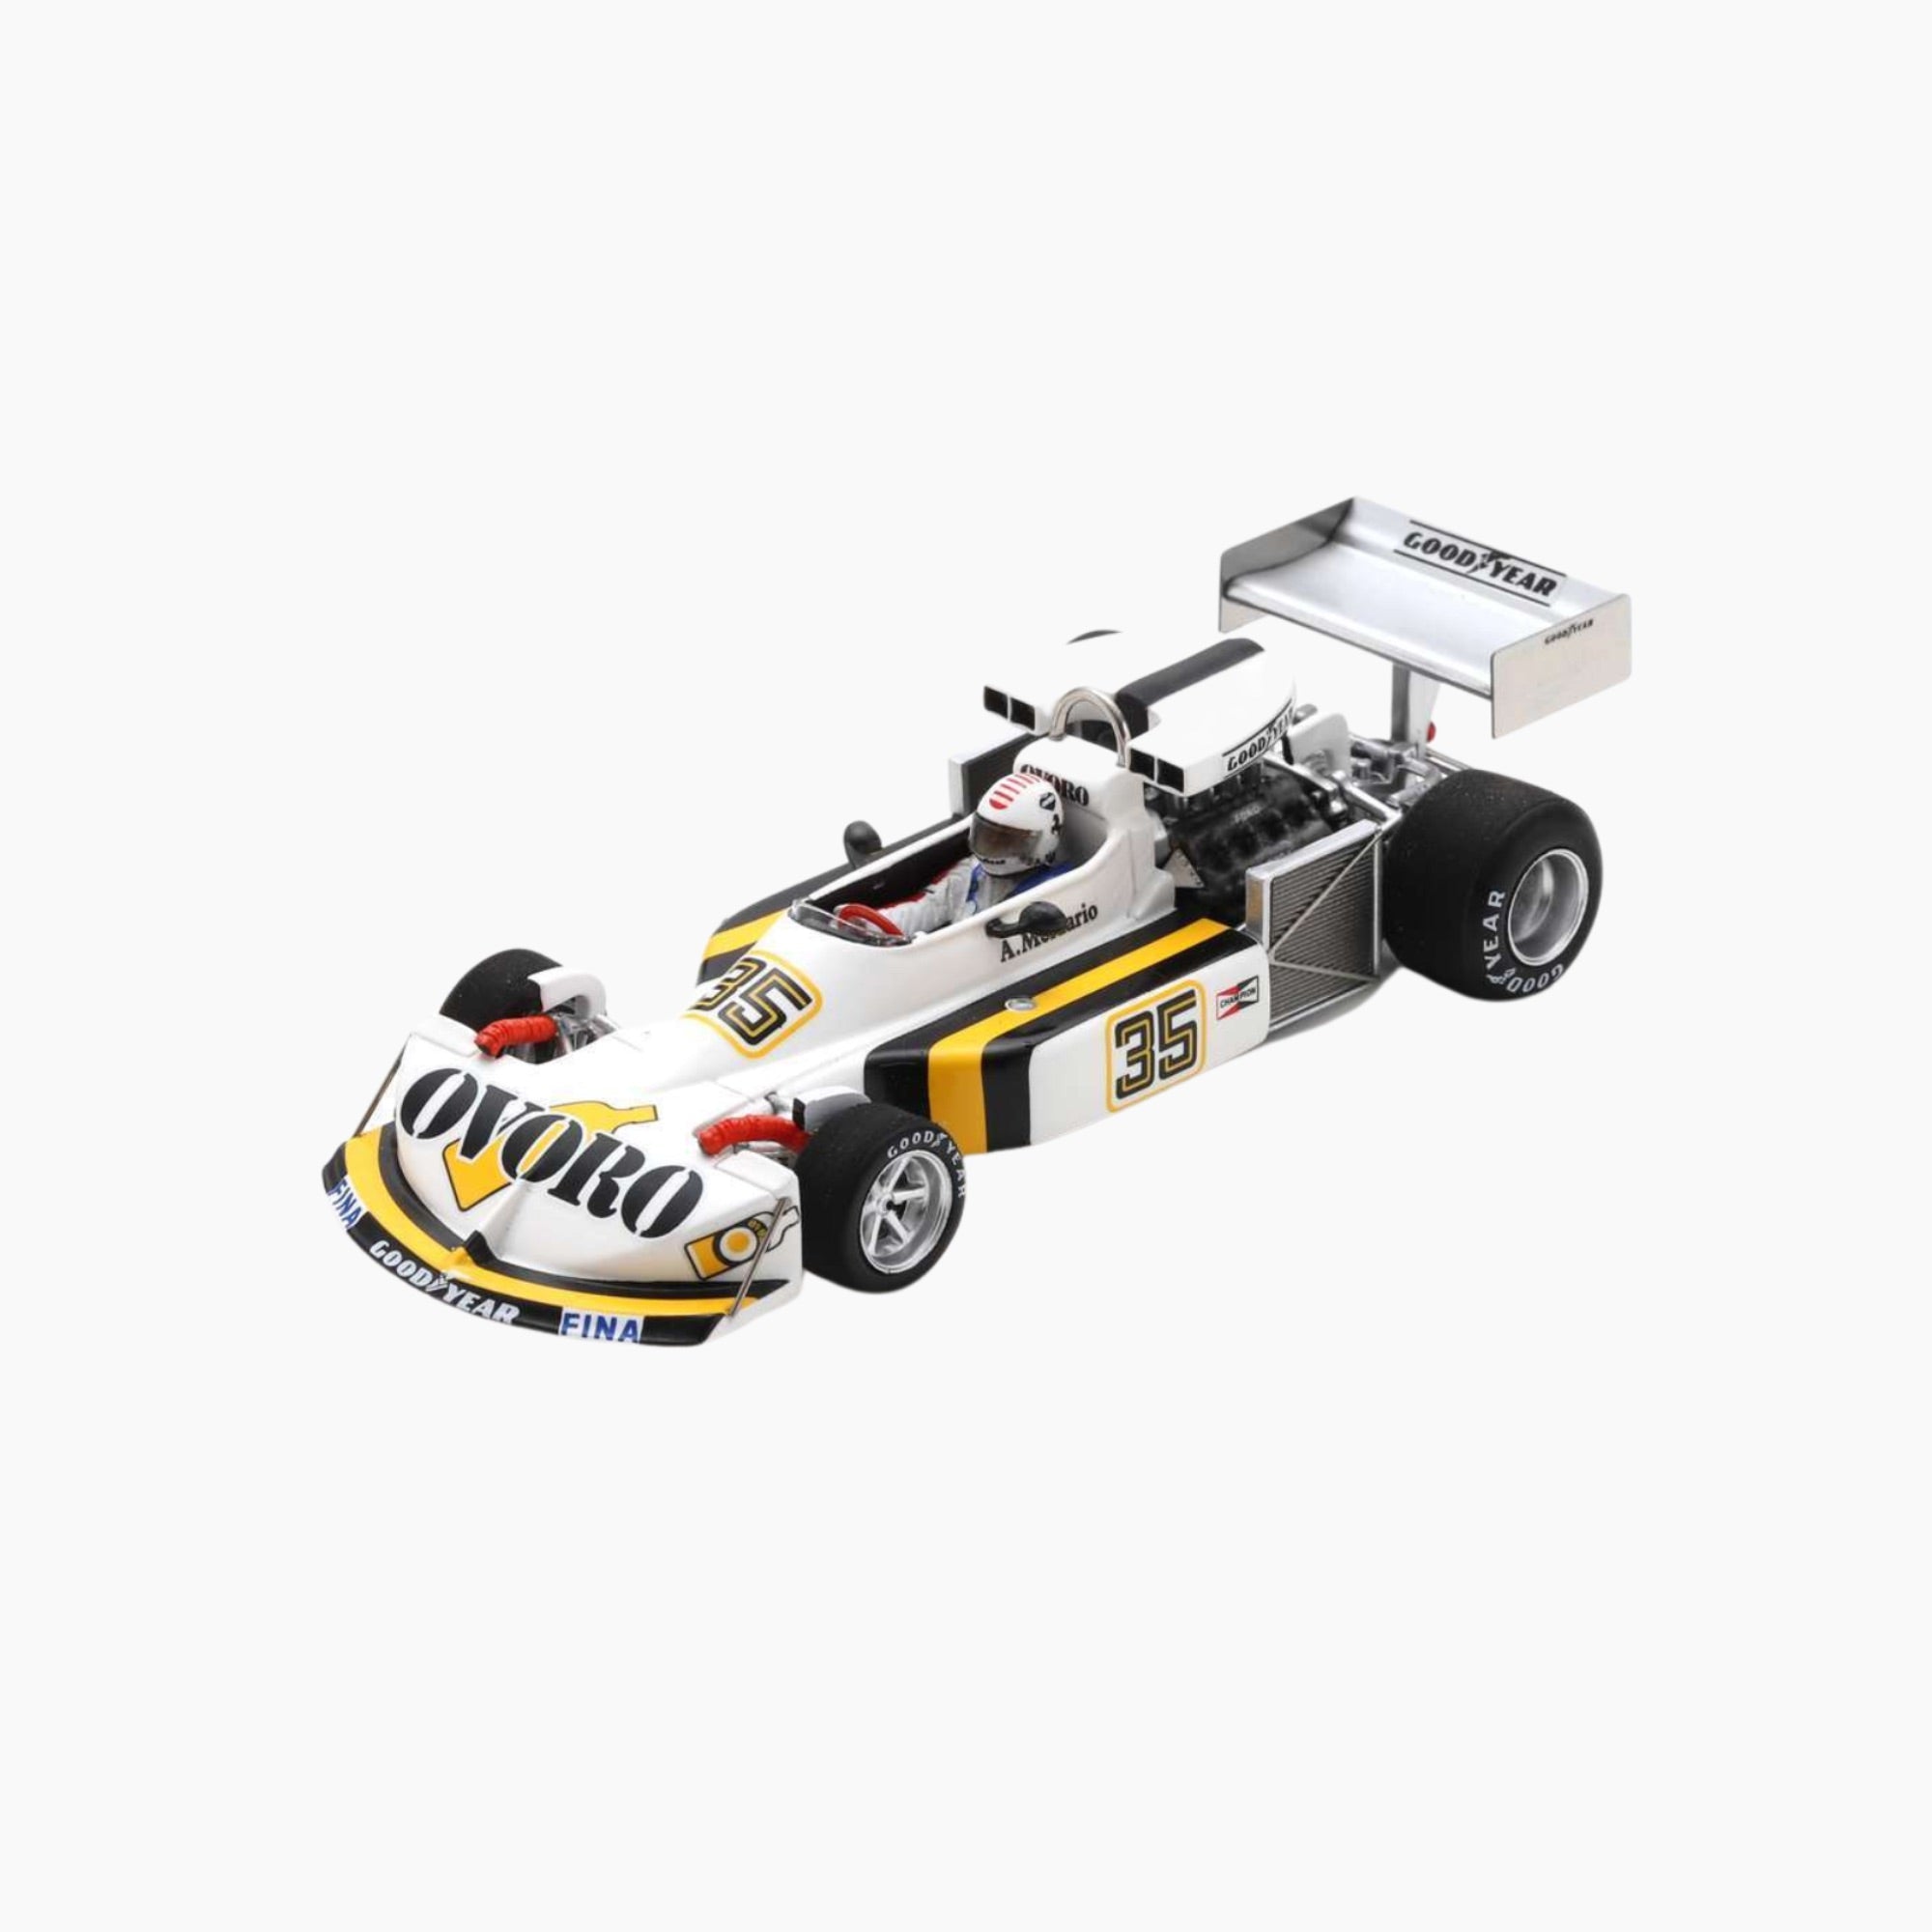 March 761 Spanish GP 1976 | 1:43 Scale Model-1:43 Scale Model-Spark Models-gpx-store